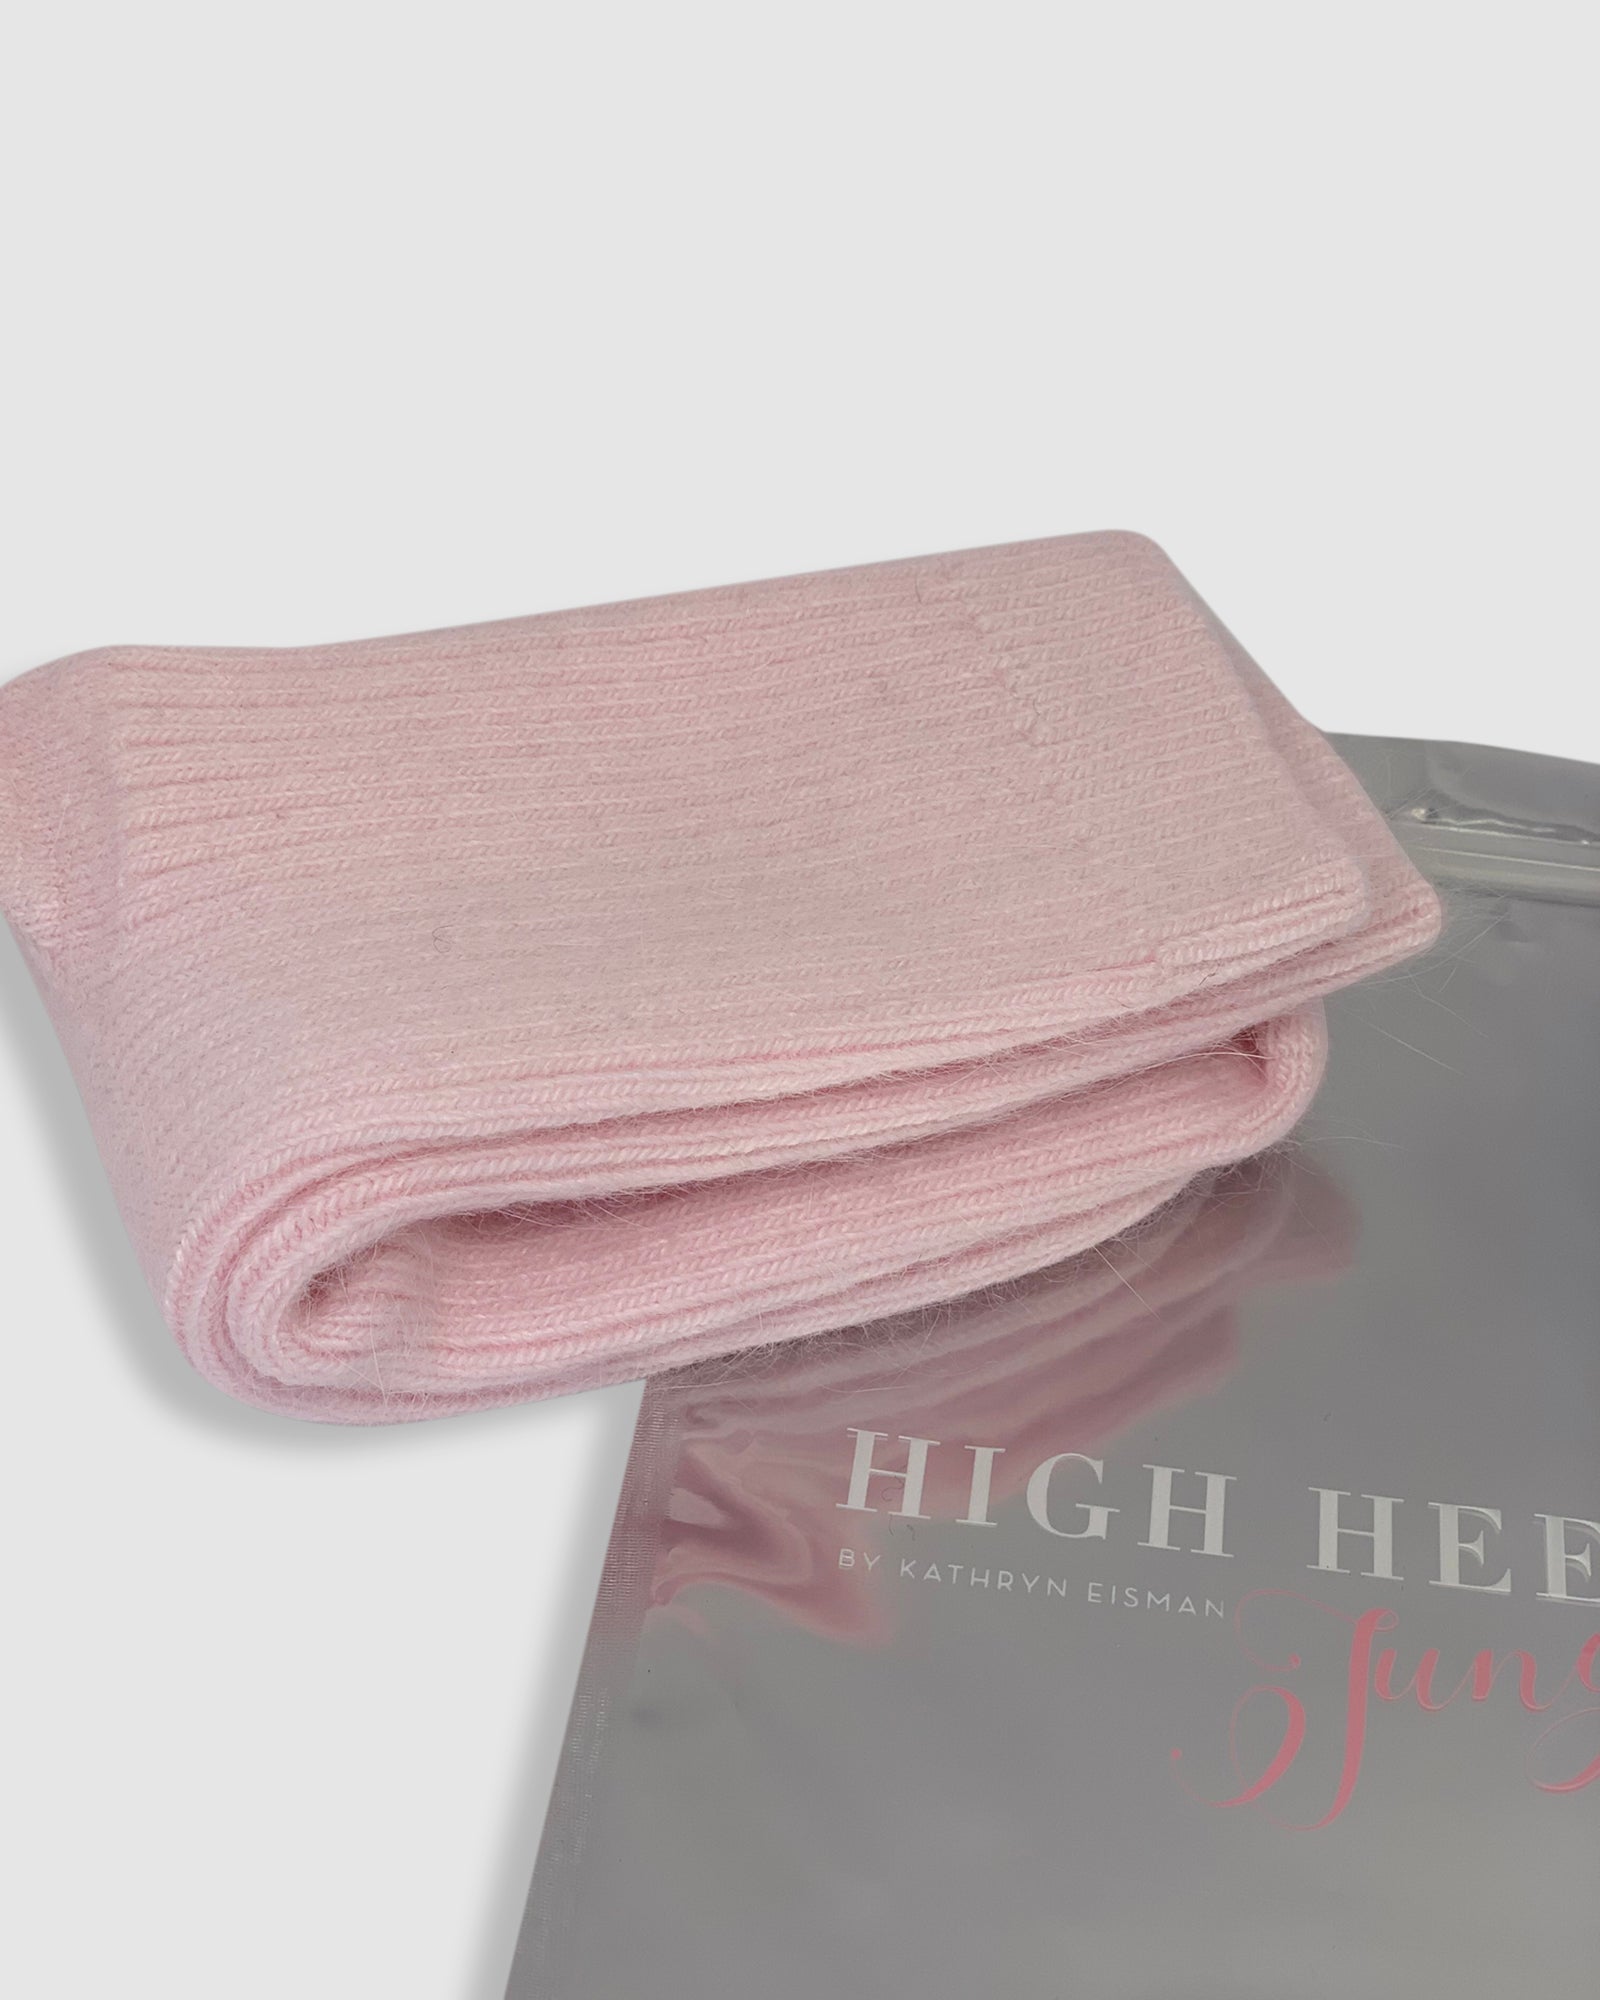 Cashmere Sock - Baby Pink